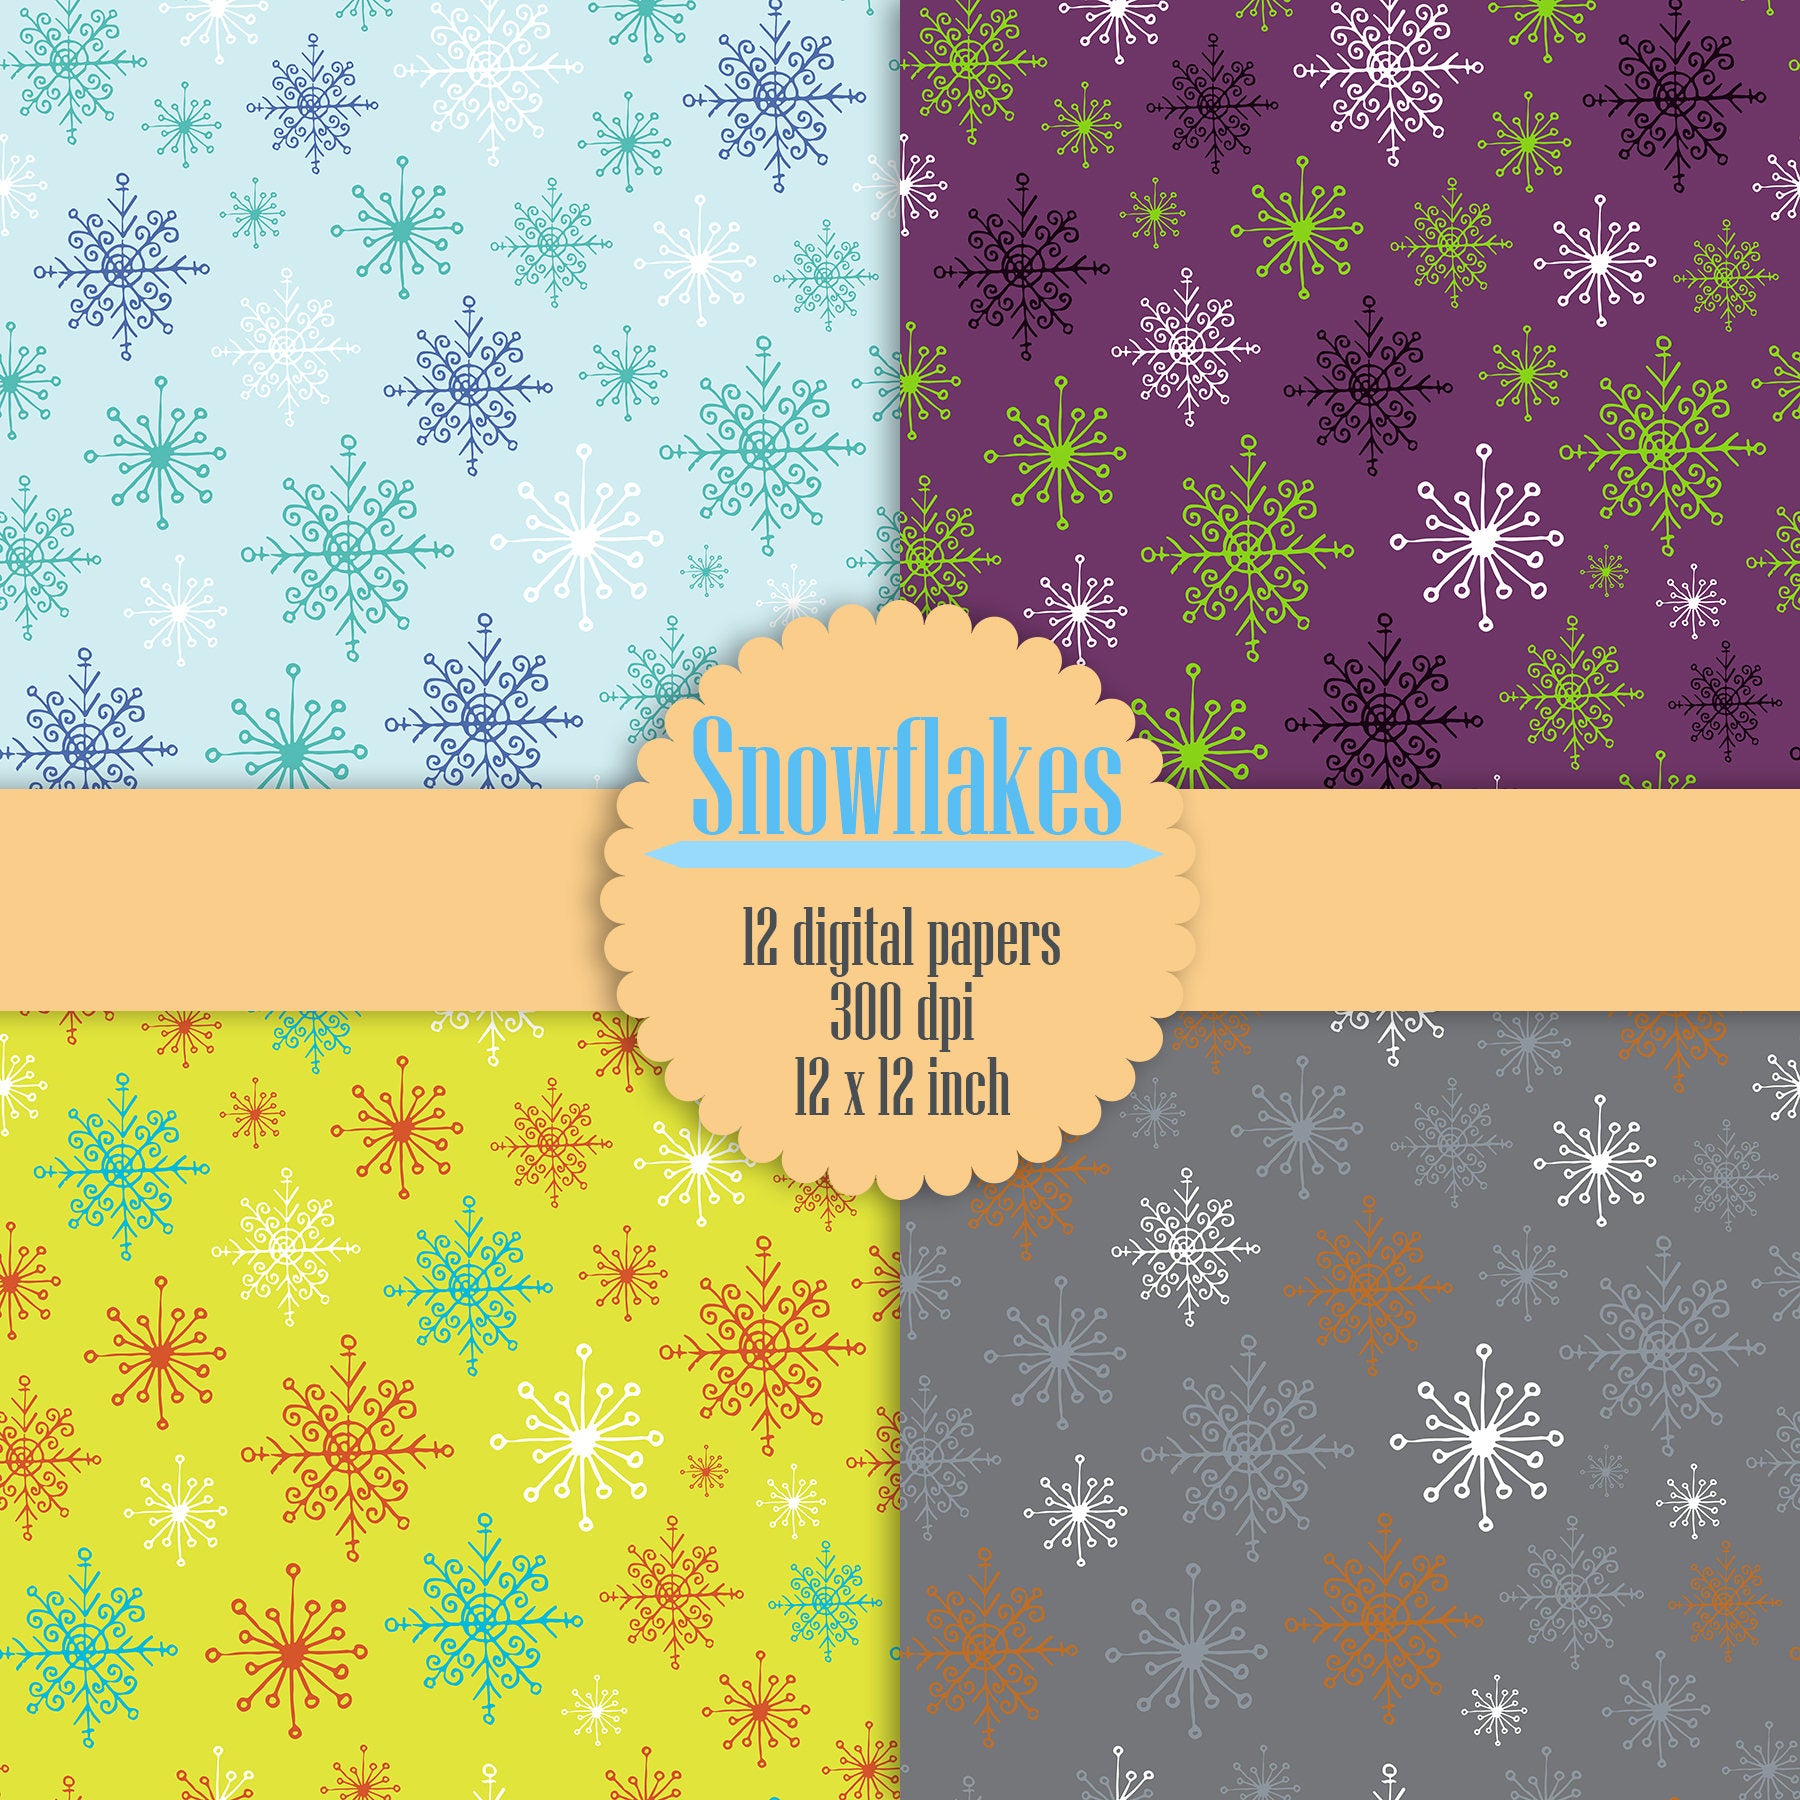 12 Snowflake Digital Papers 12&quot; Instant Download, Winter Digital Papers, Snowflake Pattern, High Resolution 300 dpi